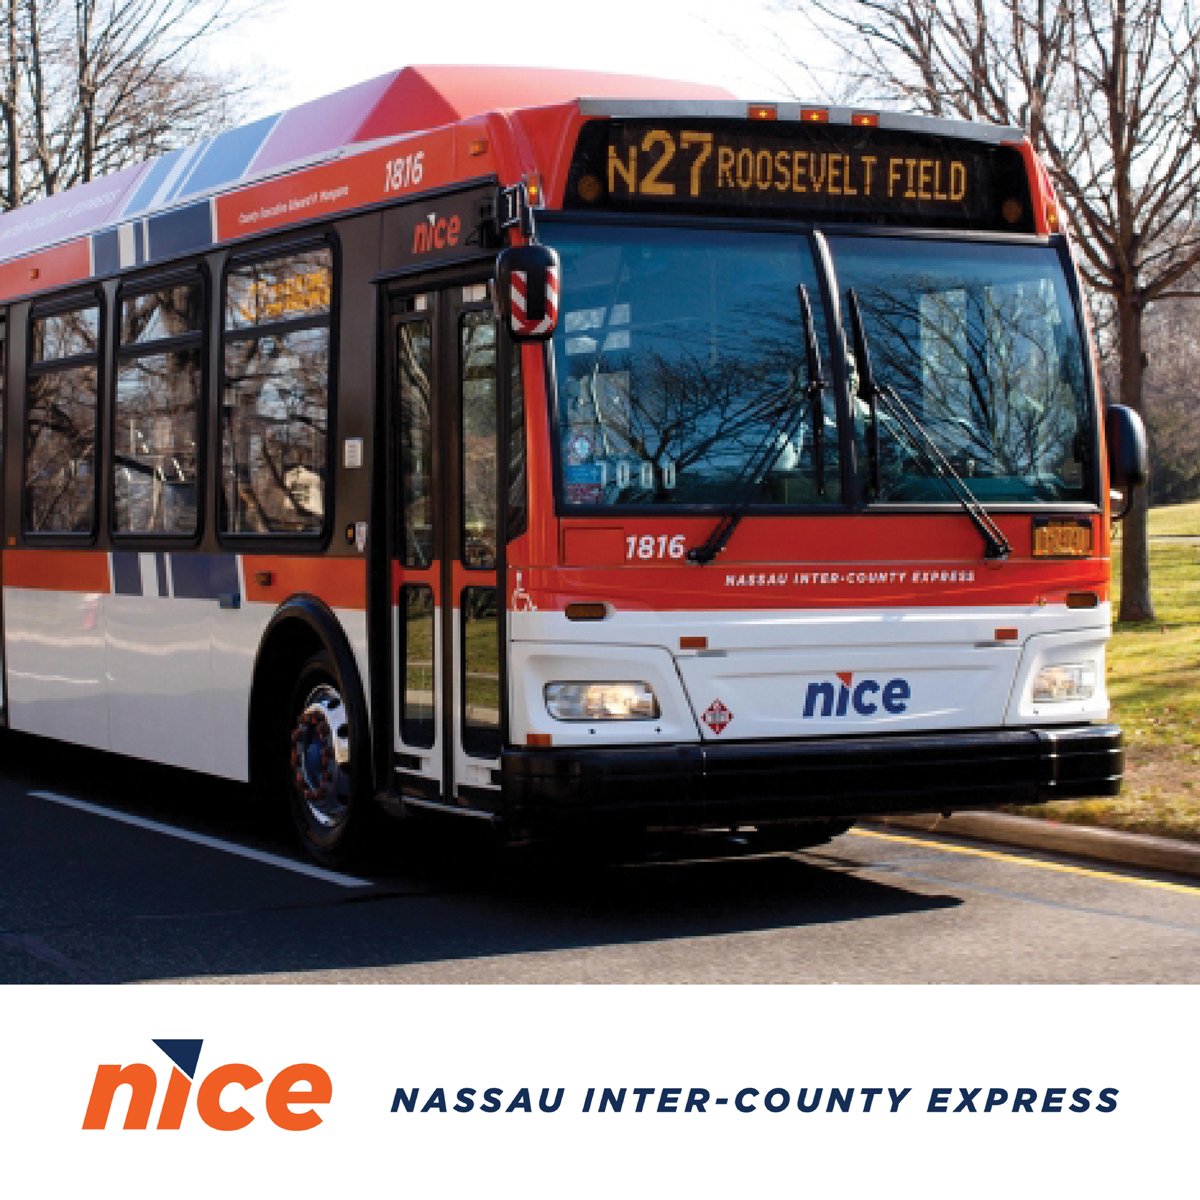 Looking for a better commuting option in Nassau County? Take @theNICEbus! You'll be free of the hassle of traffic and will help improve air quality in the area. Download the GoMobile app to get started! nicebus.com/Tools/GoMobile…

#LIRR #CarFreeDayLI #CFDLI #NICEbus